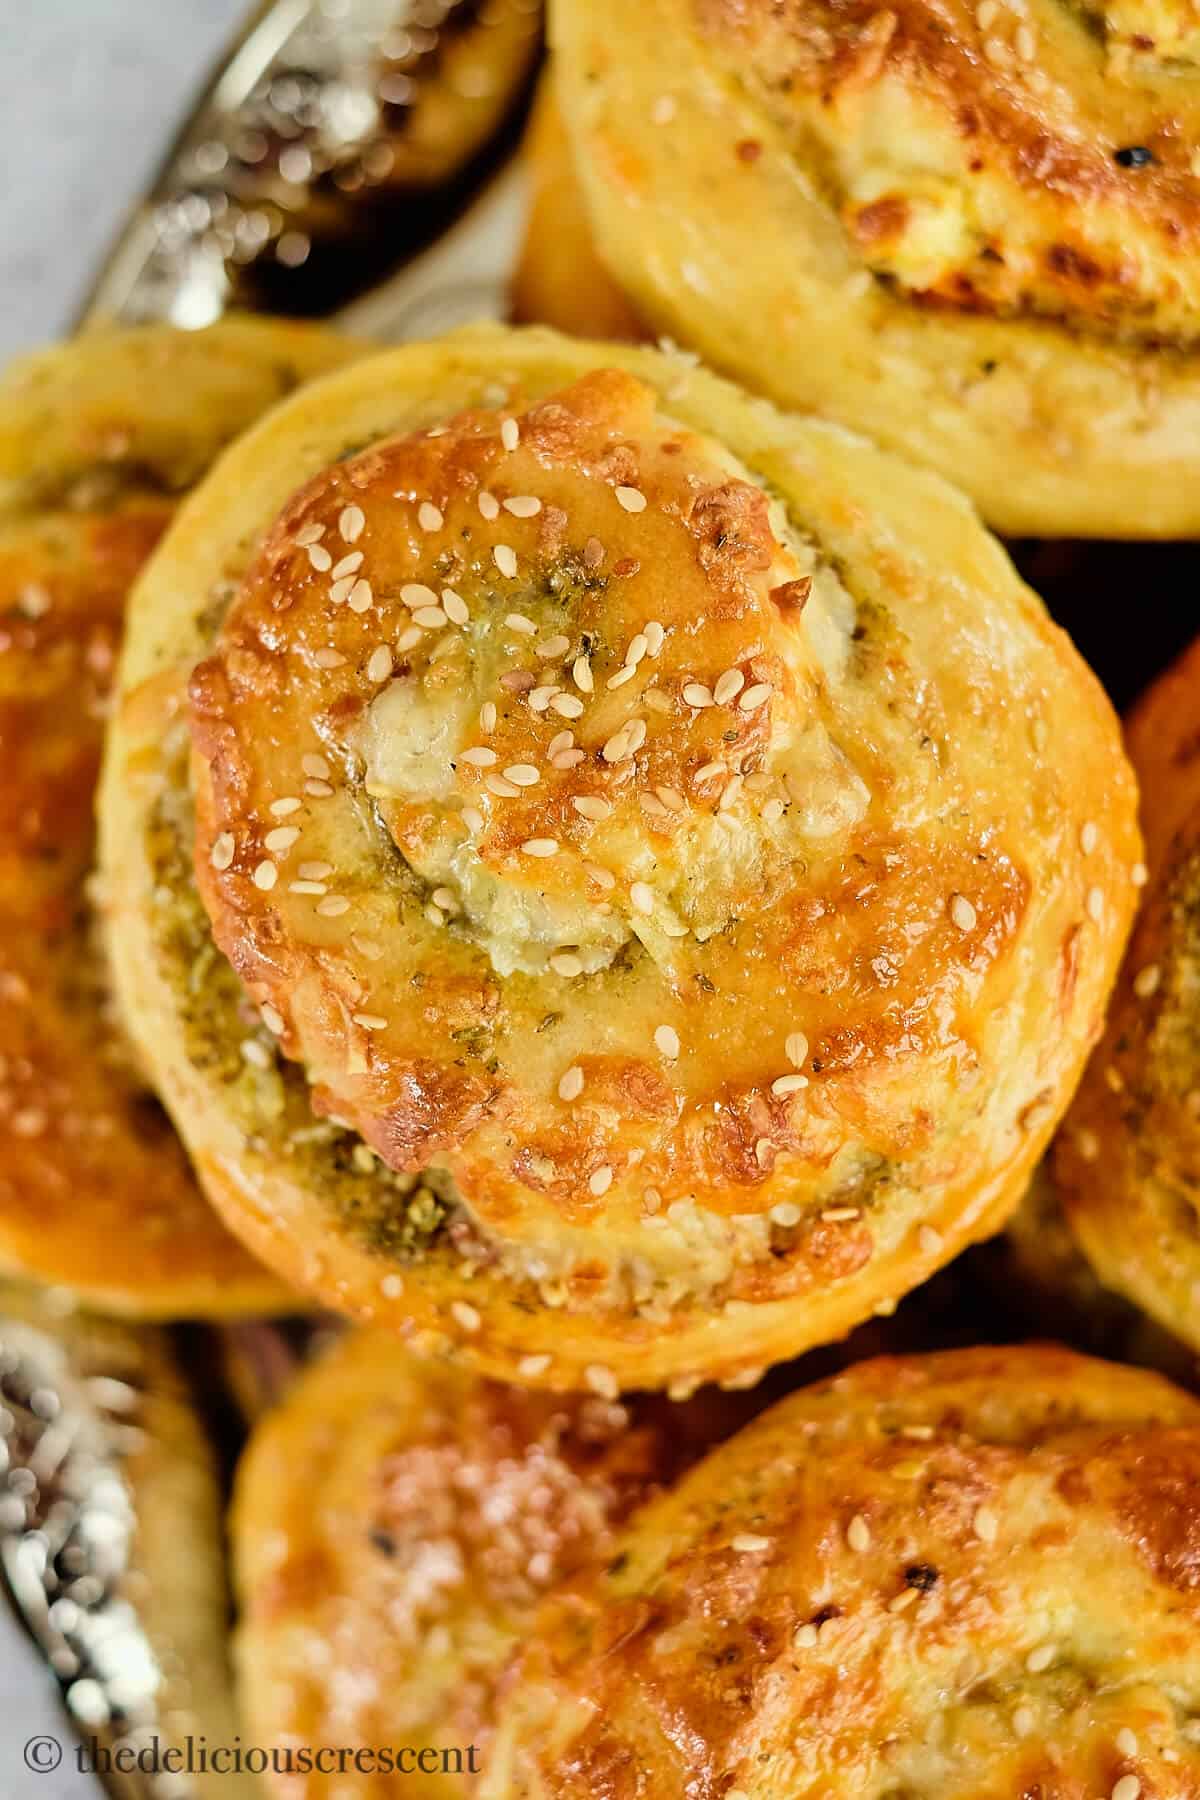 A breakfast roll filled with zaatar and cheese.